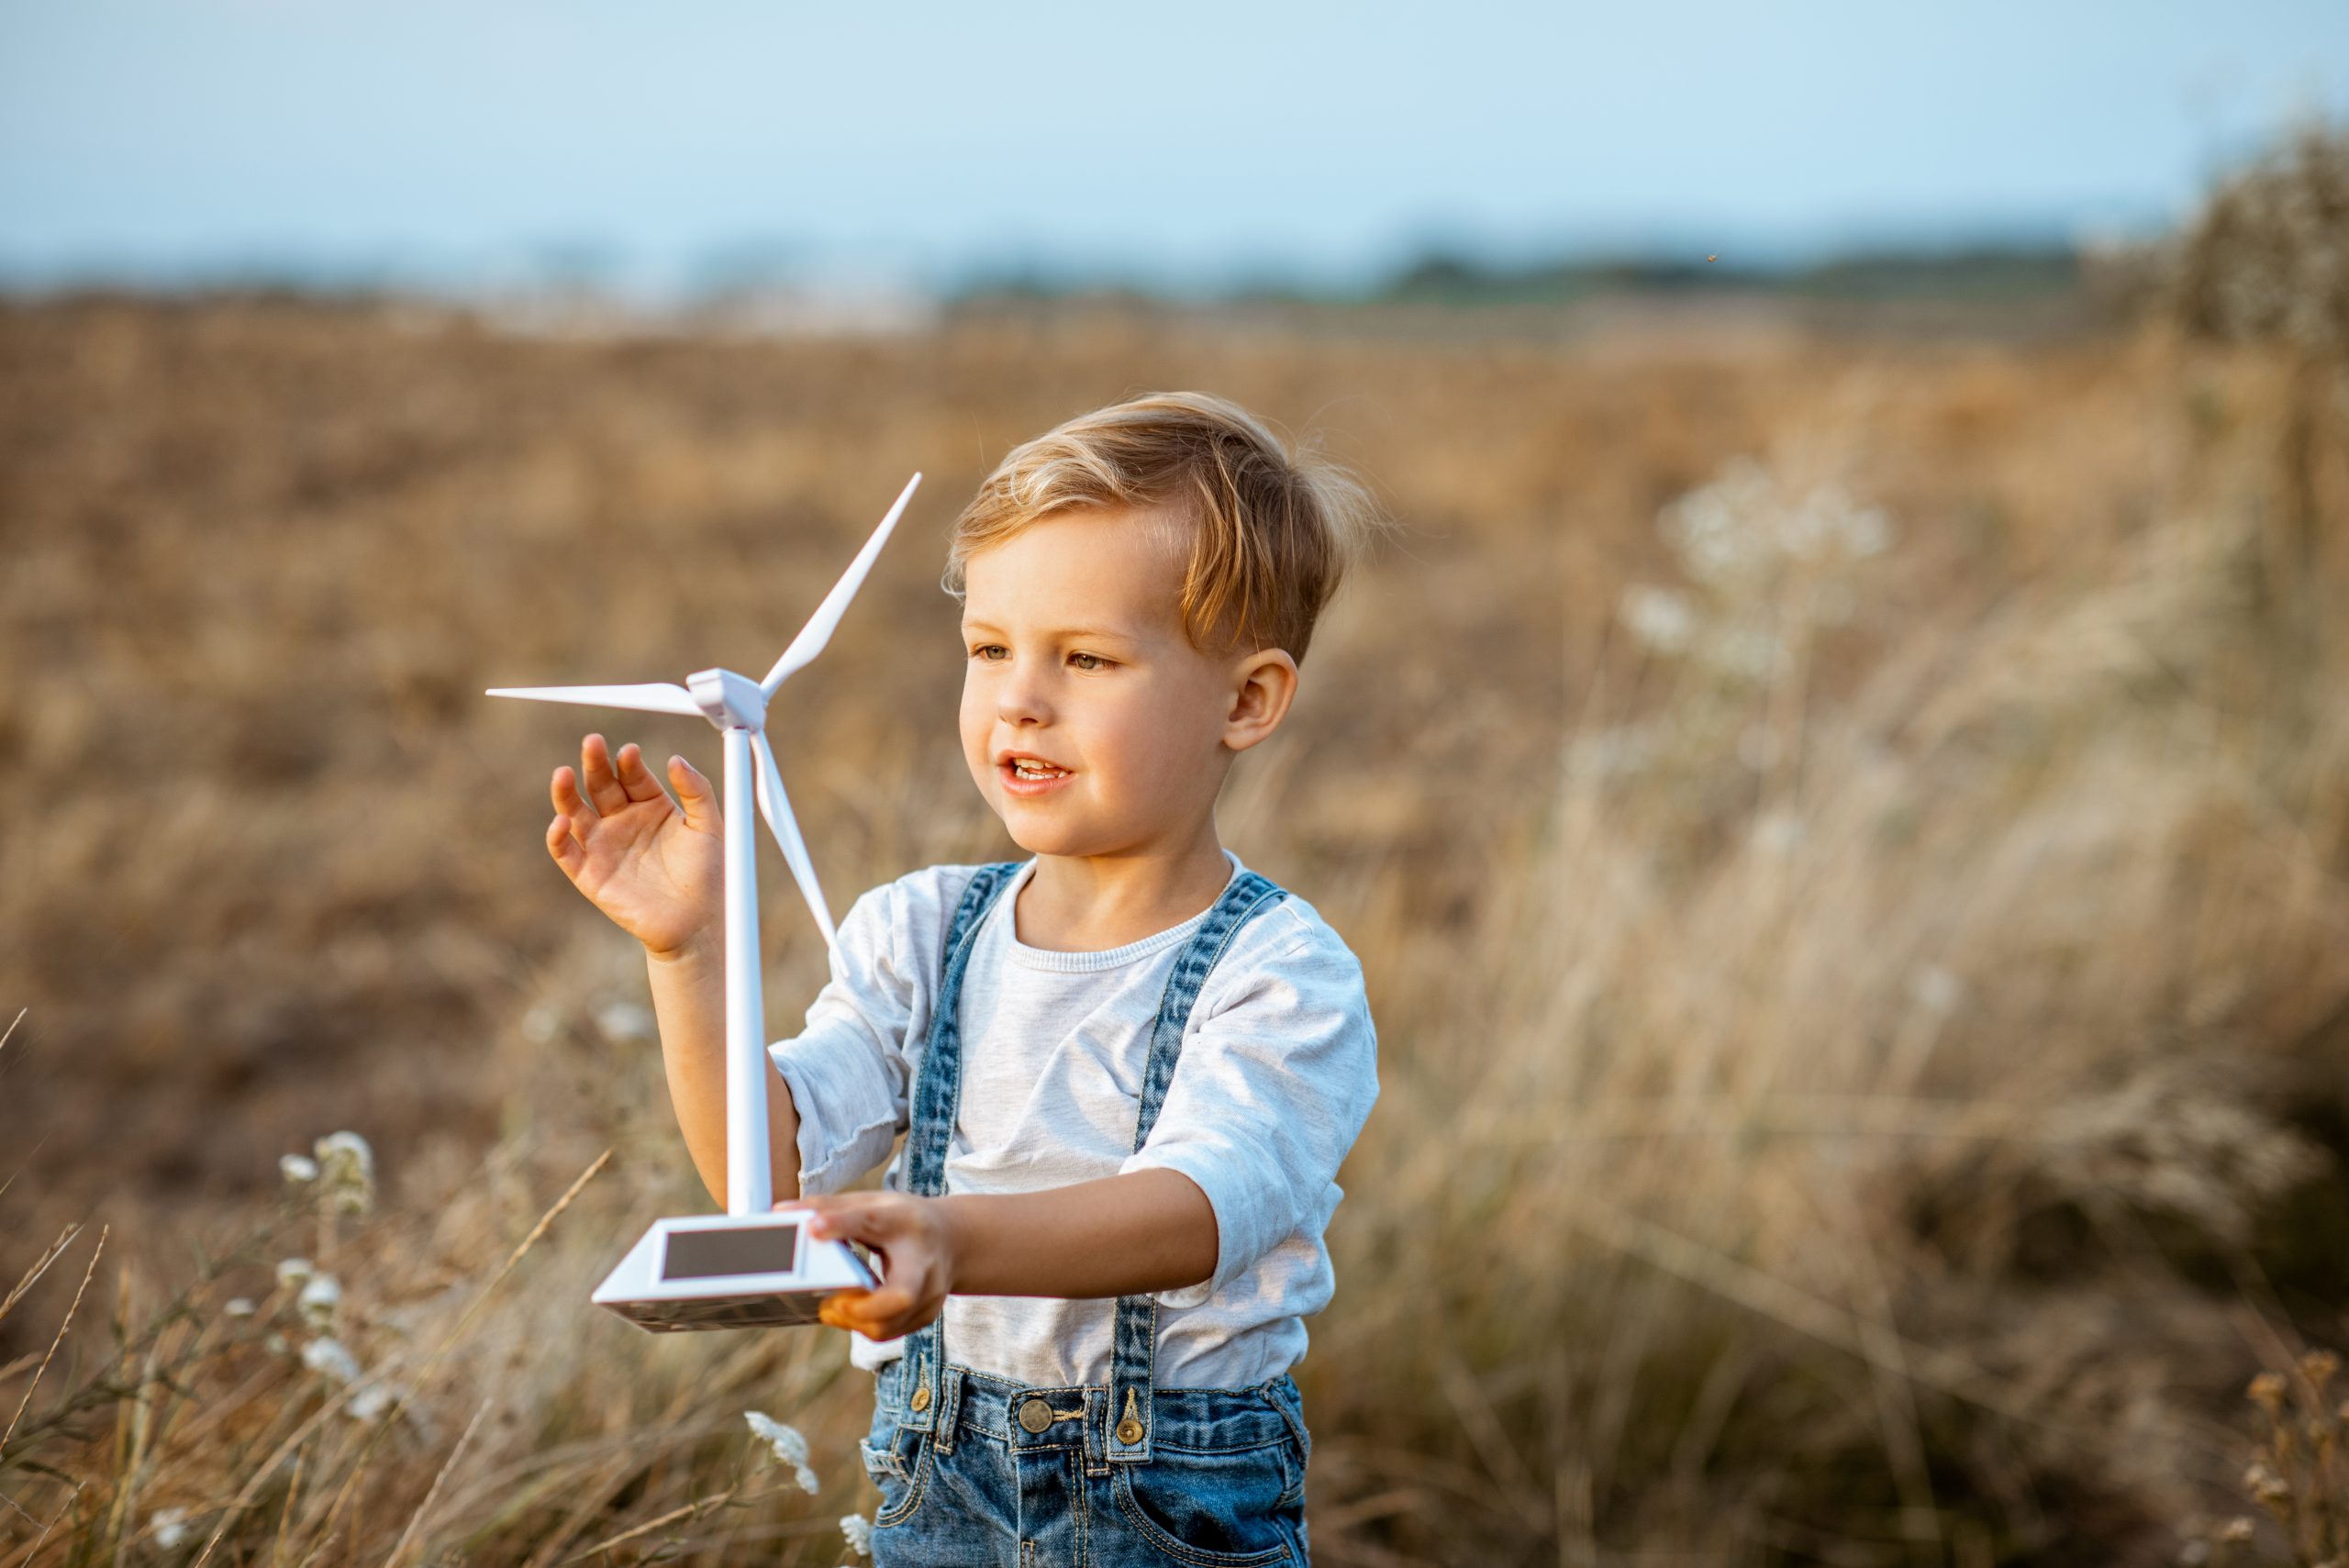 Curious young boy playing with toy wind turbine in the field, studying how green energy works from a young age